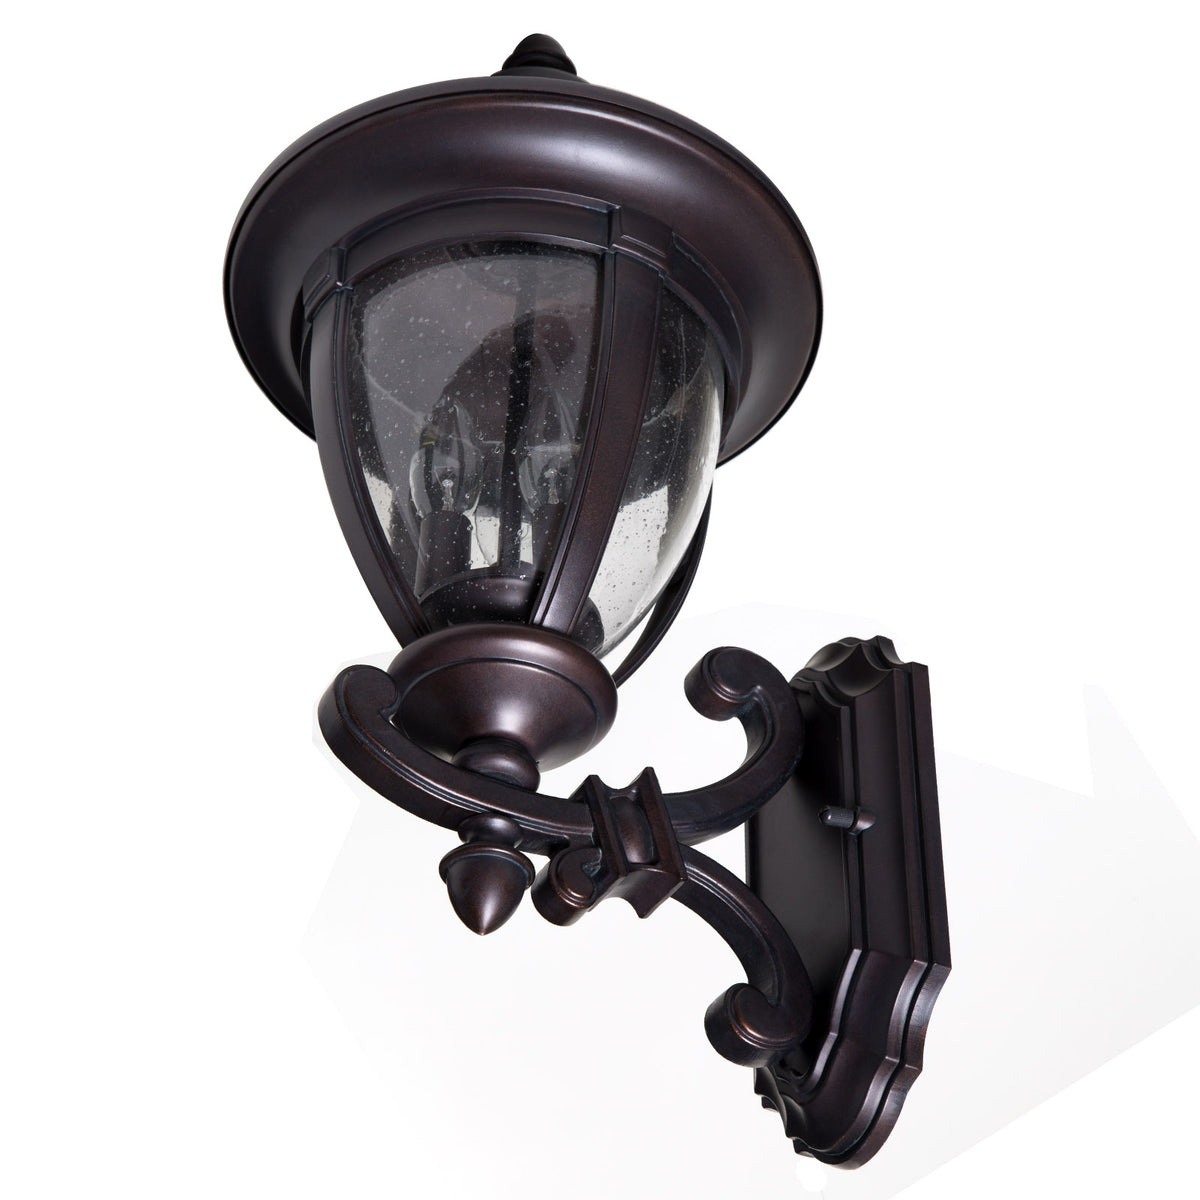 buy wall mount light fixtures at cheap rate in bulk. wholesale & retail lighting equipments store. home décor ideas, maintenance, repair replacement parts